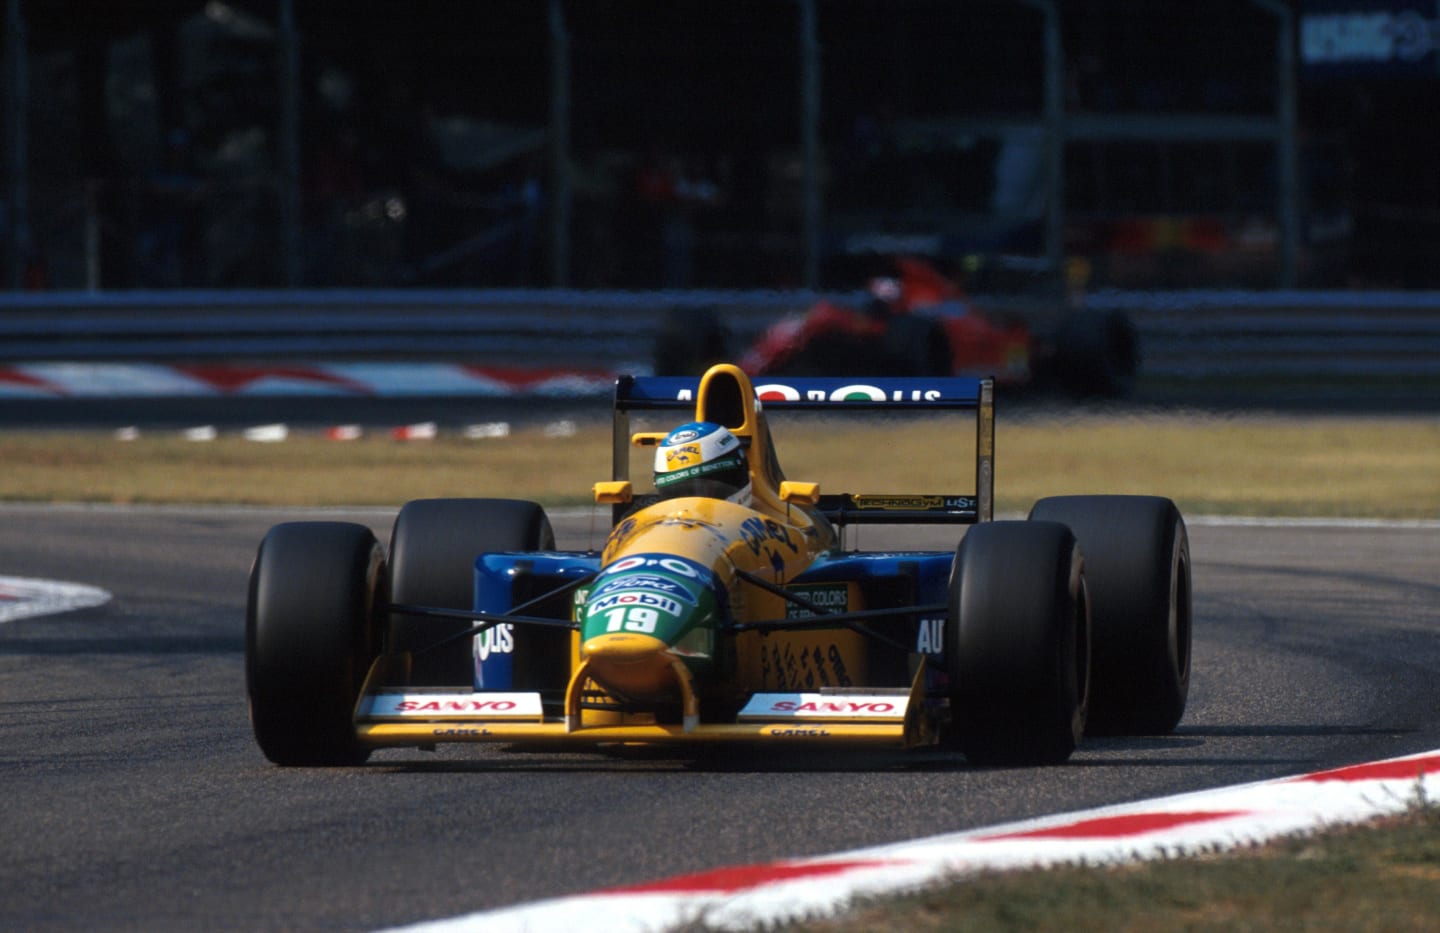 Michael Schumacher (GER) Benetton B191 finished fifth in only his second Grand Prix.
Italian Grand